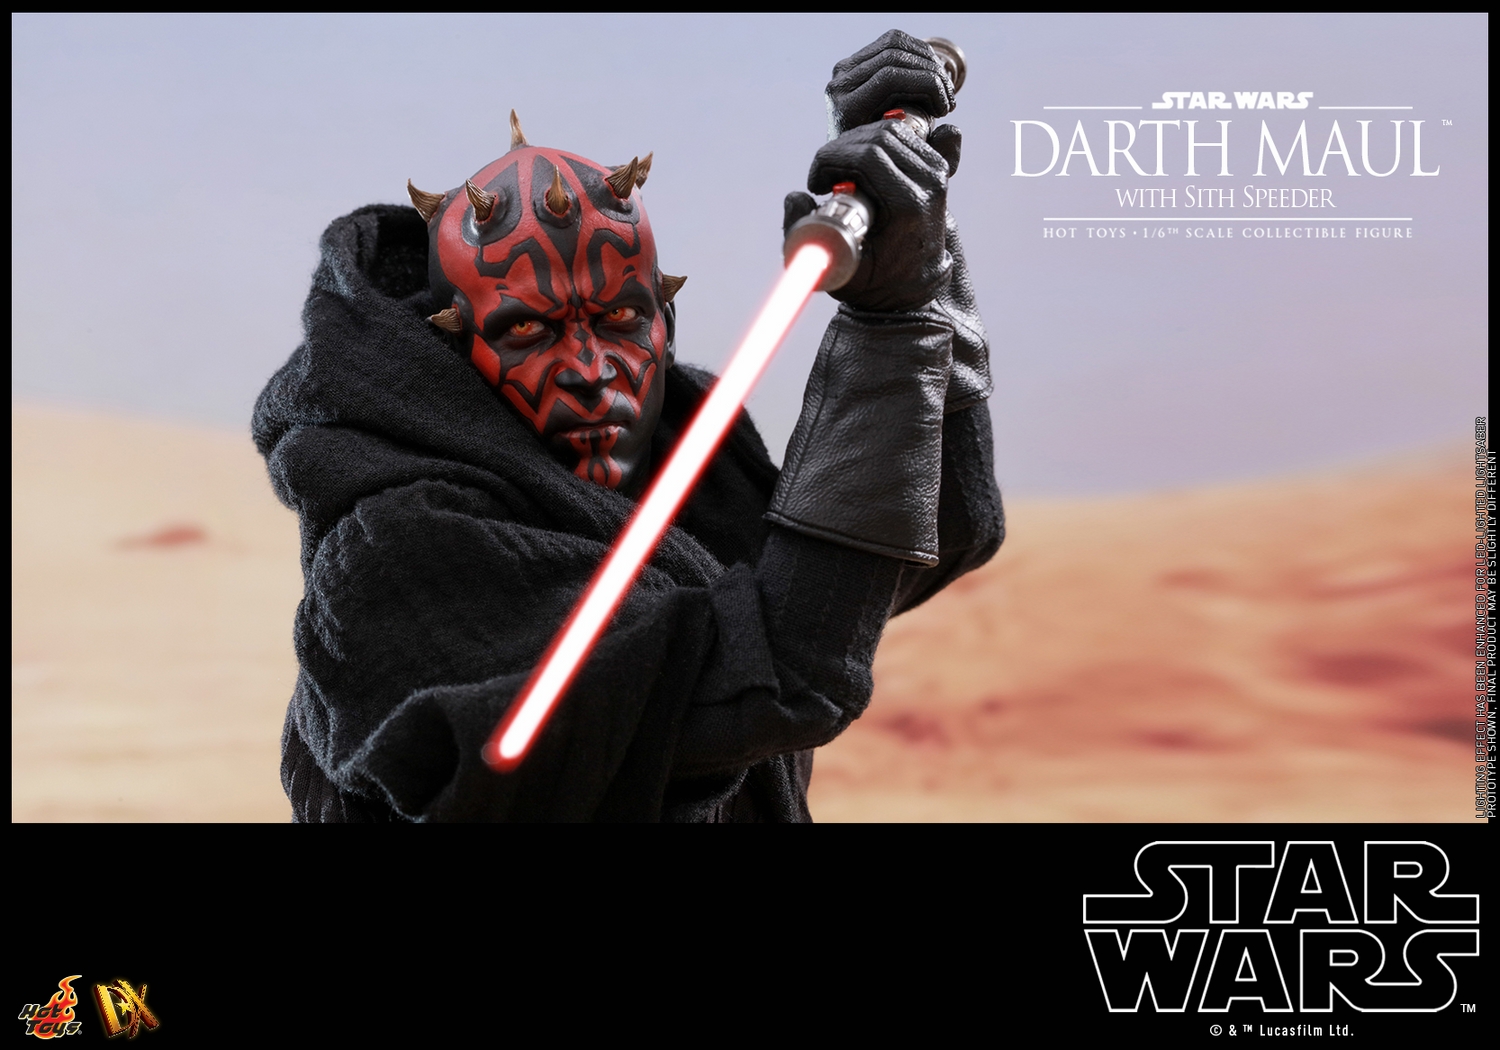 hot-toys-star-wars-1-6-darth-maul-with-sith-speeder-dx17-collectible-figure-006.jpg